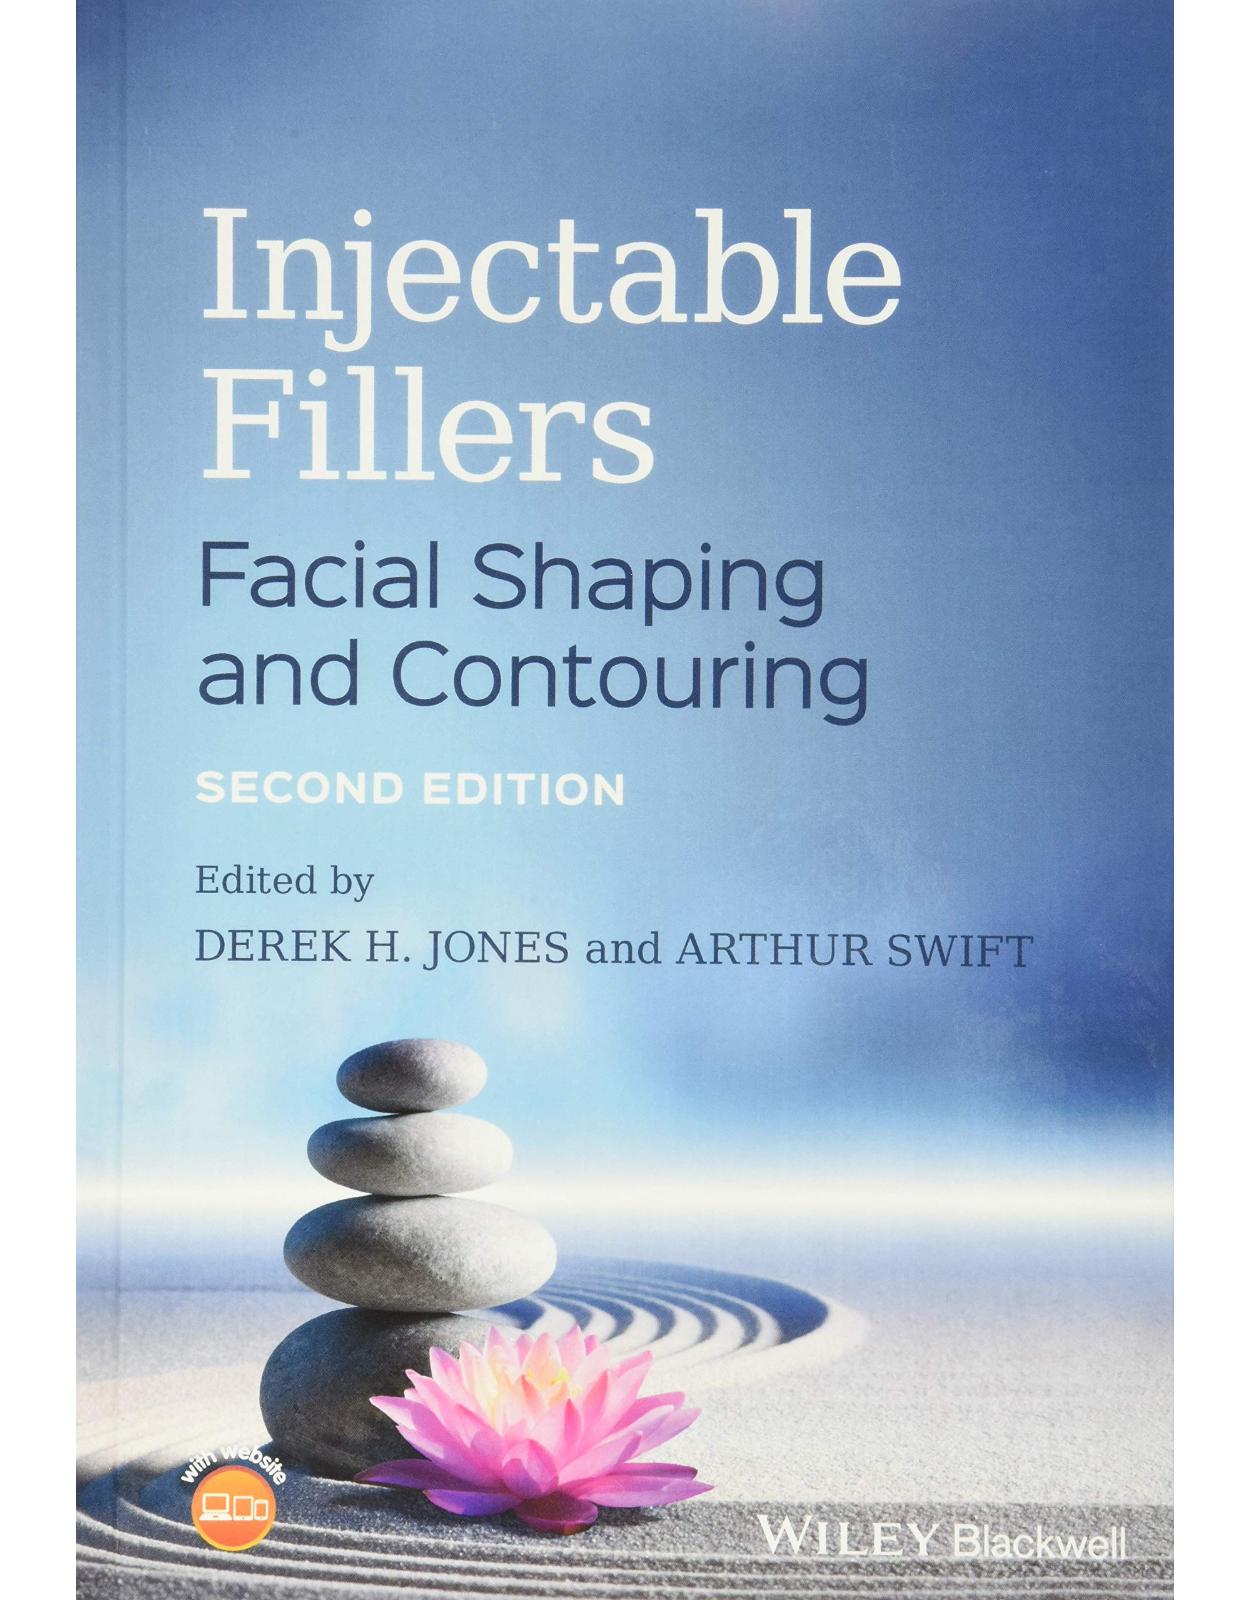 Injectable Fillers: Facial Shaping and Contouring